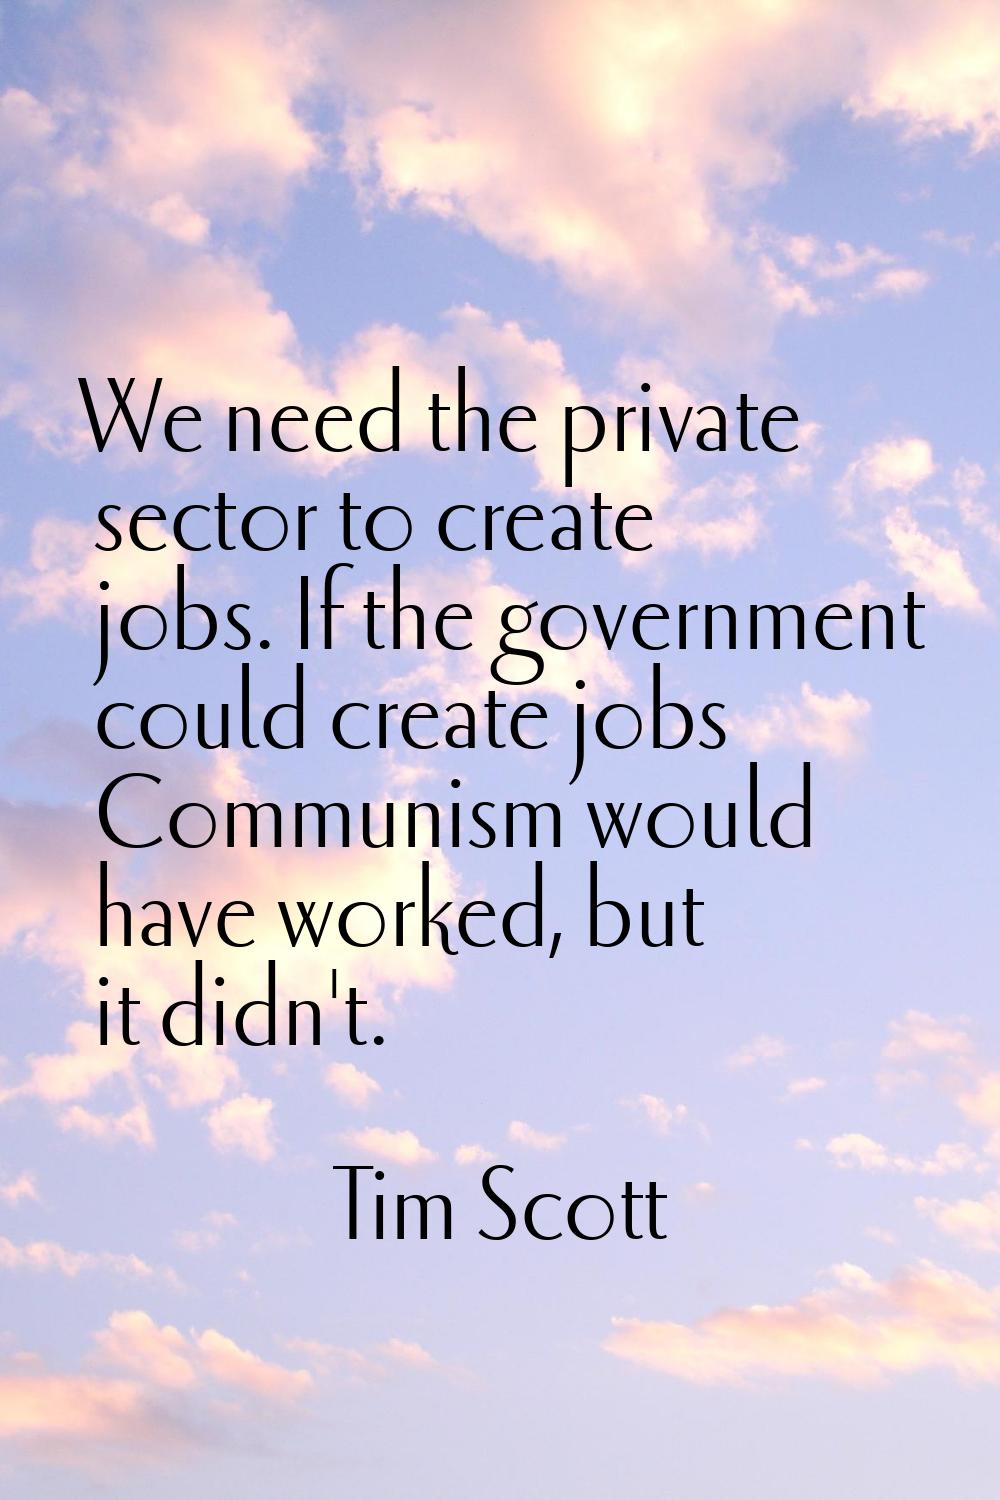 We need the private sector to create jobs. If the government could create jobs Communism would have